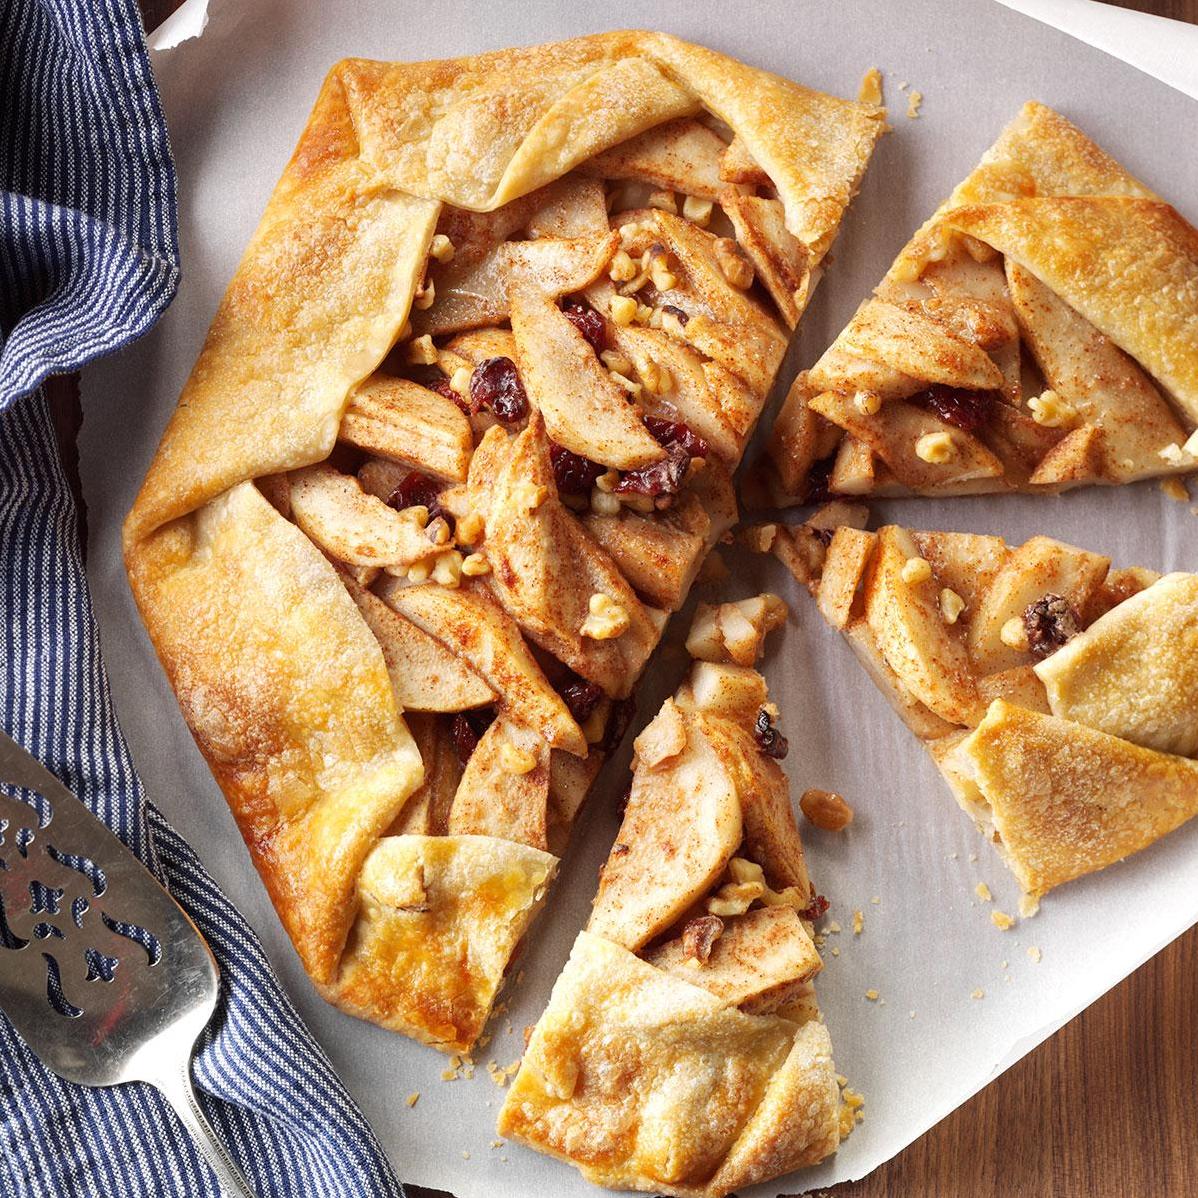  The crispy crust perfectly complements the soft and sweet pear filling.